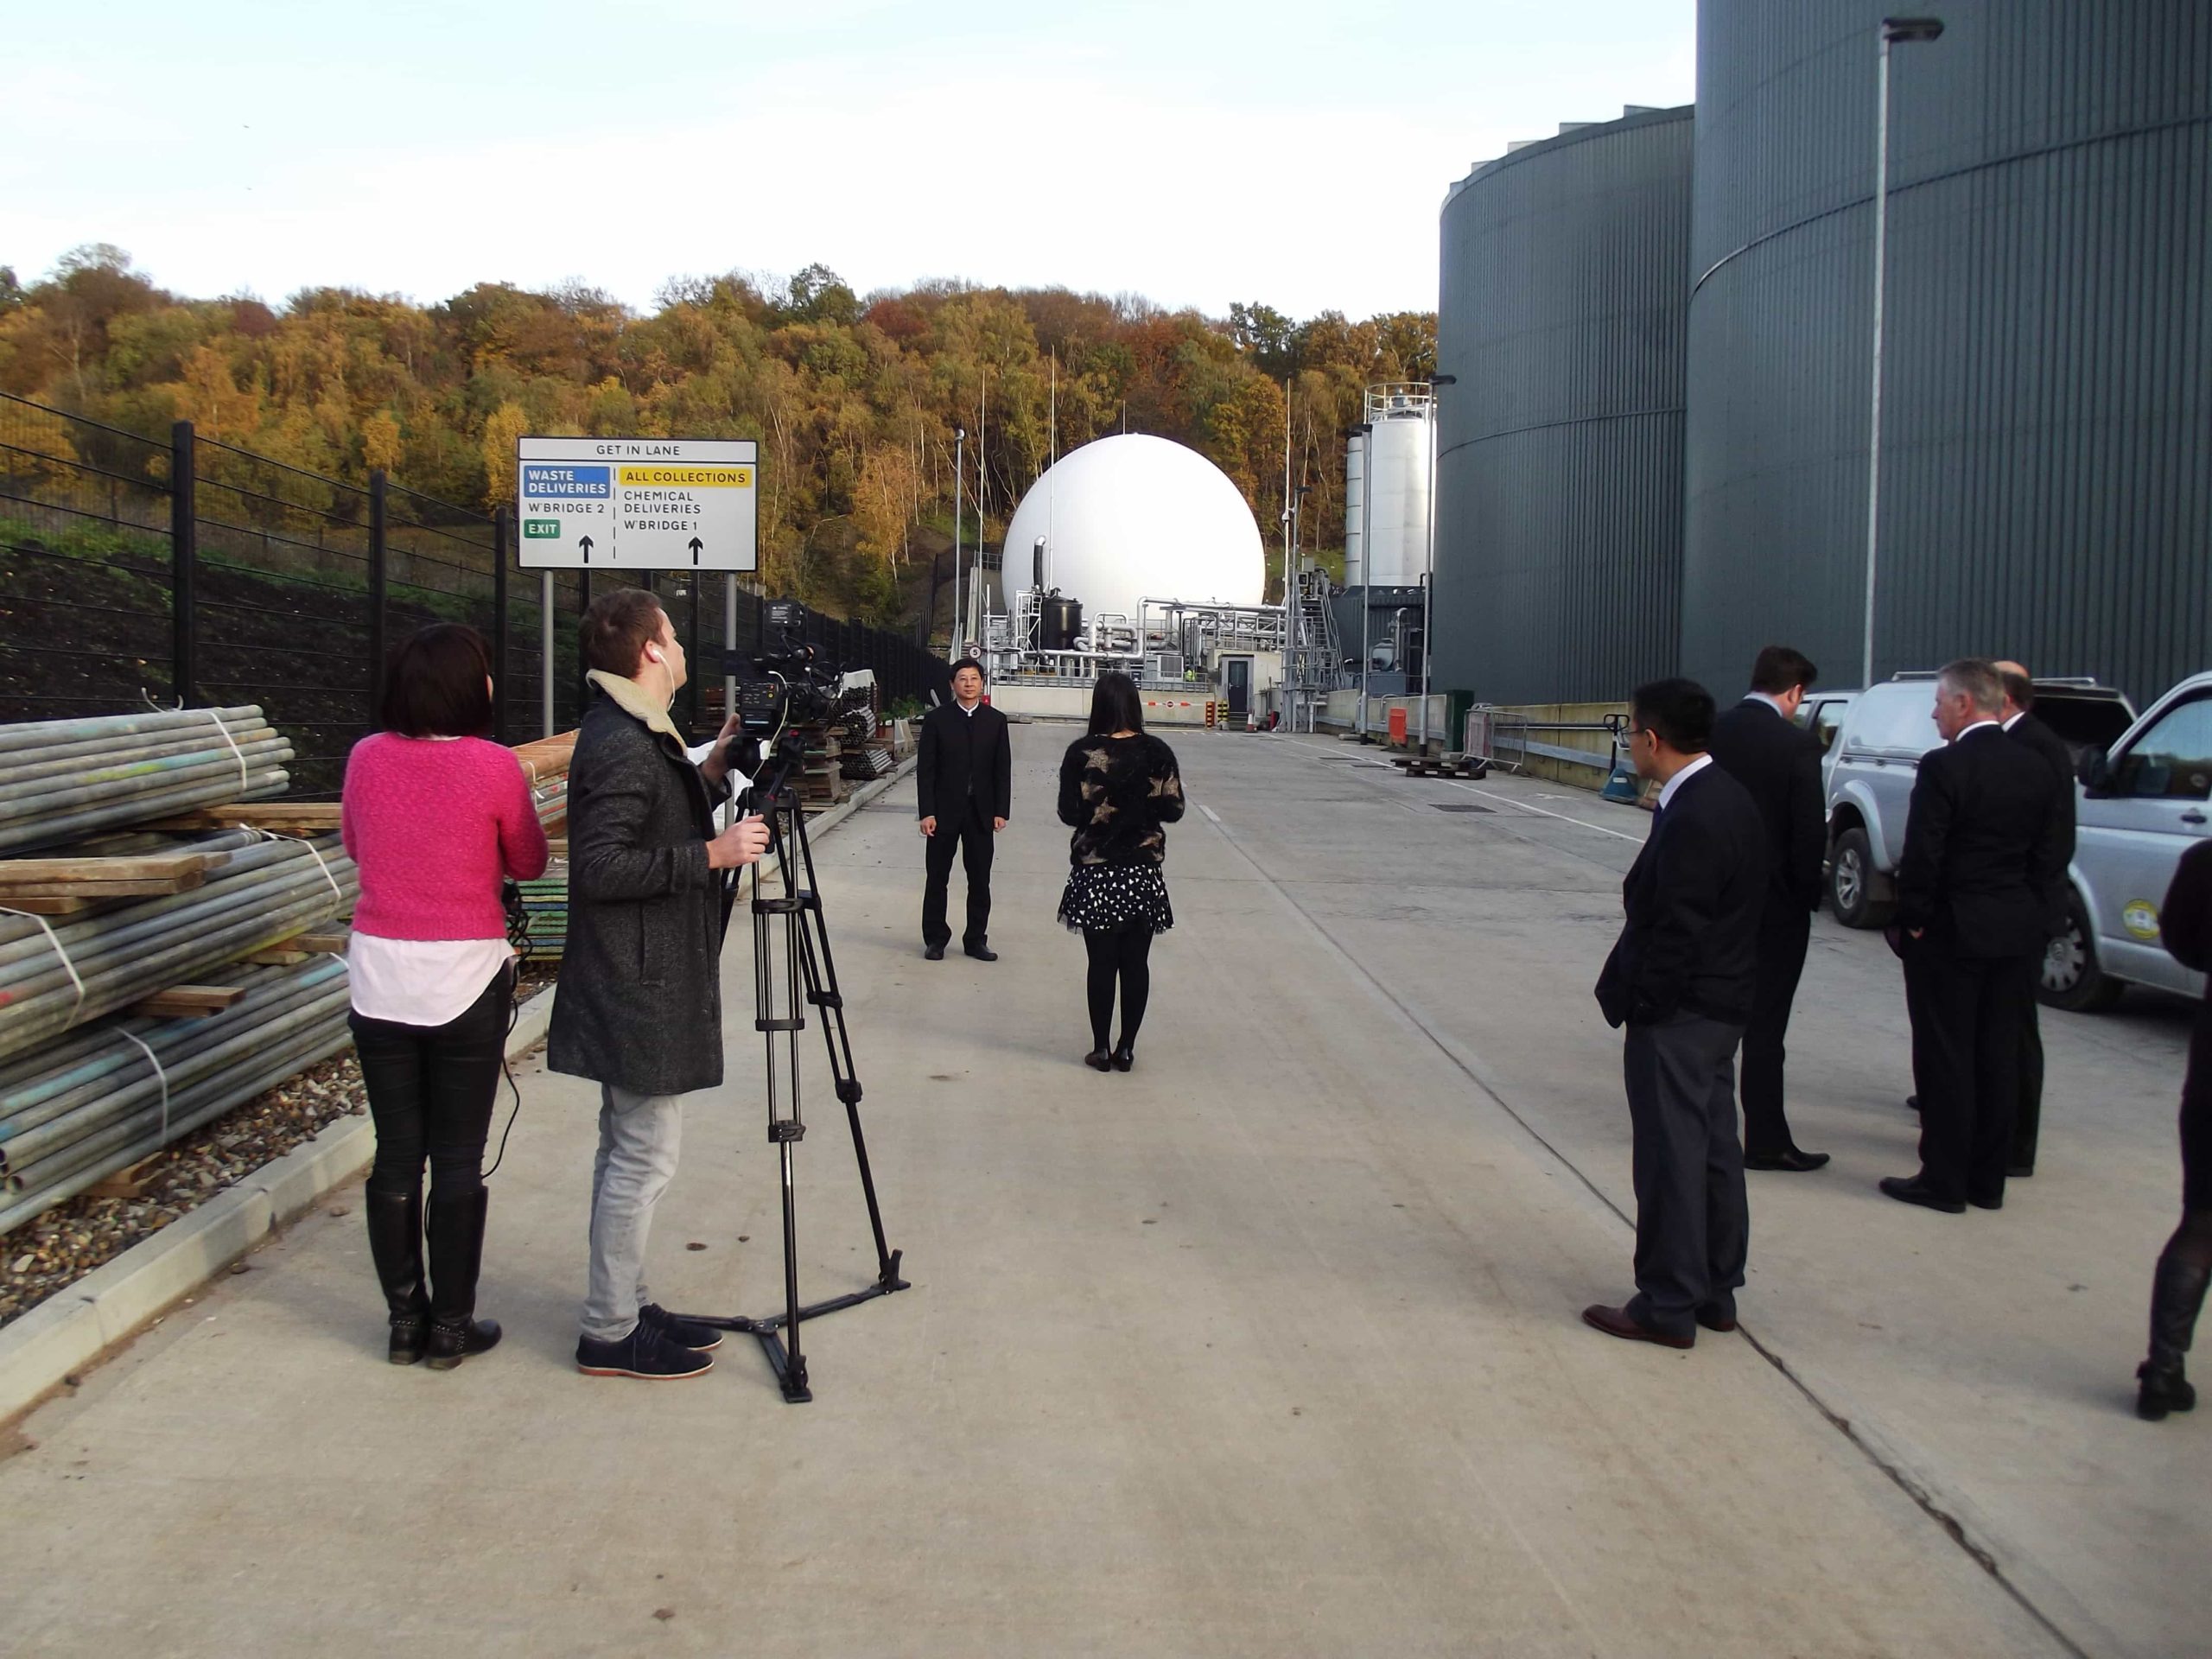 The Chinese Society of Environmental Sciences took a tour of the technology at Biffa’s West Sussex MBT facility in 2013